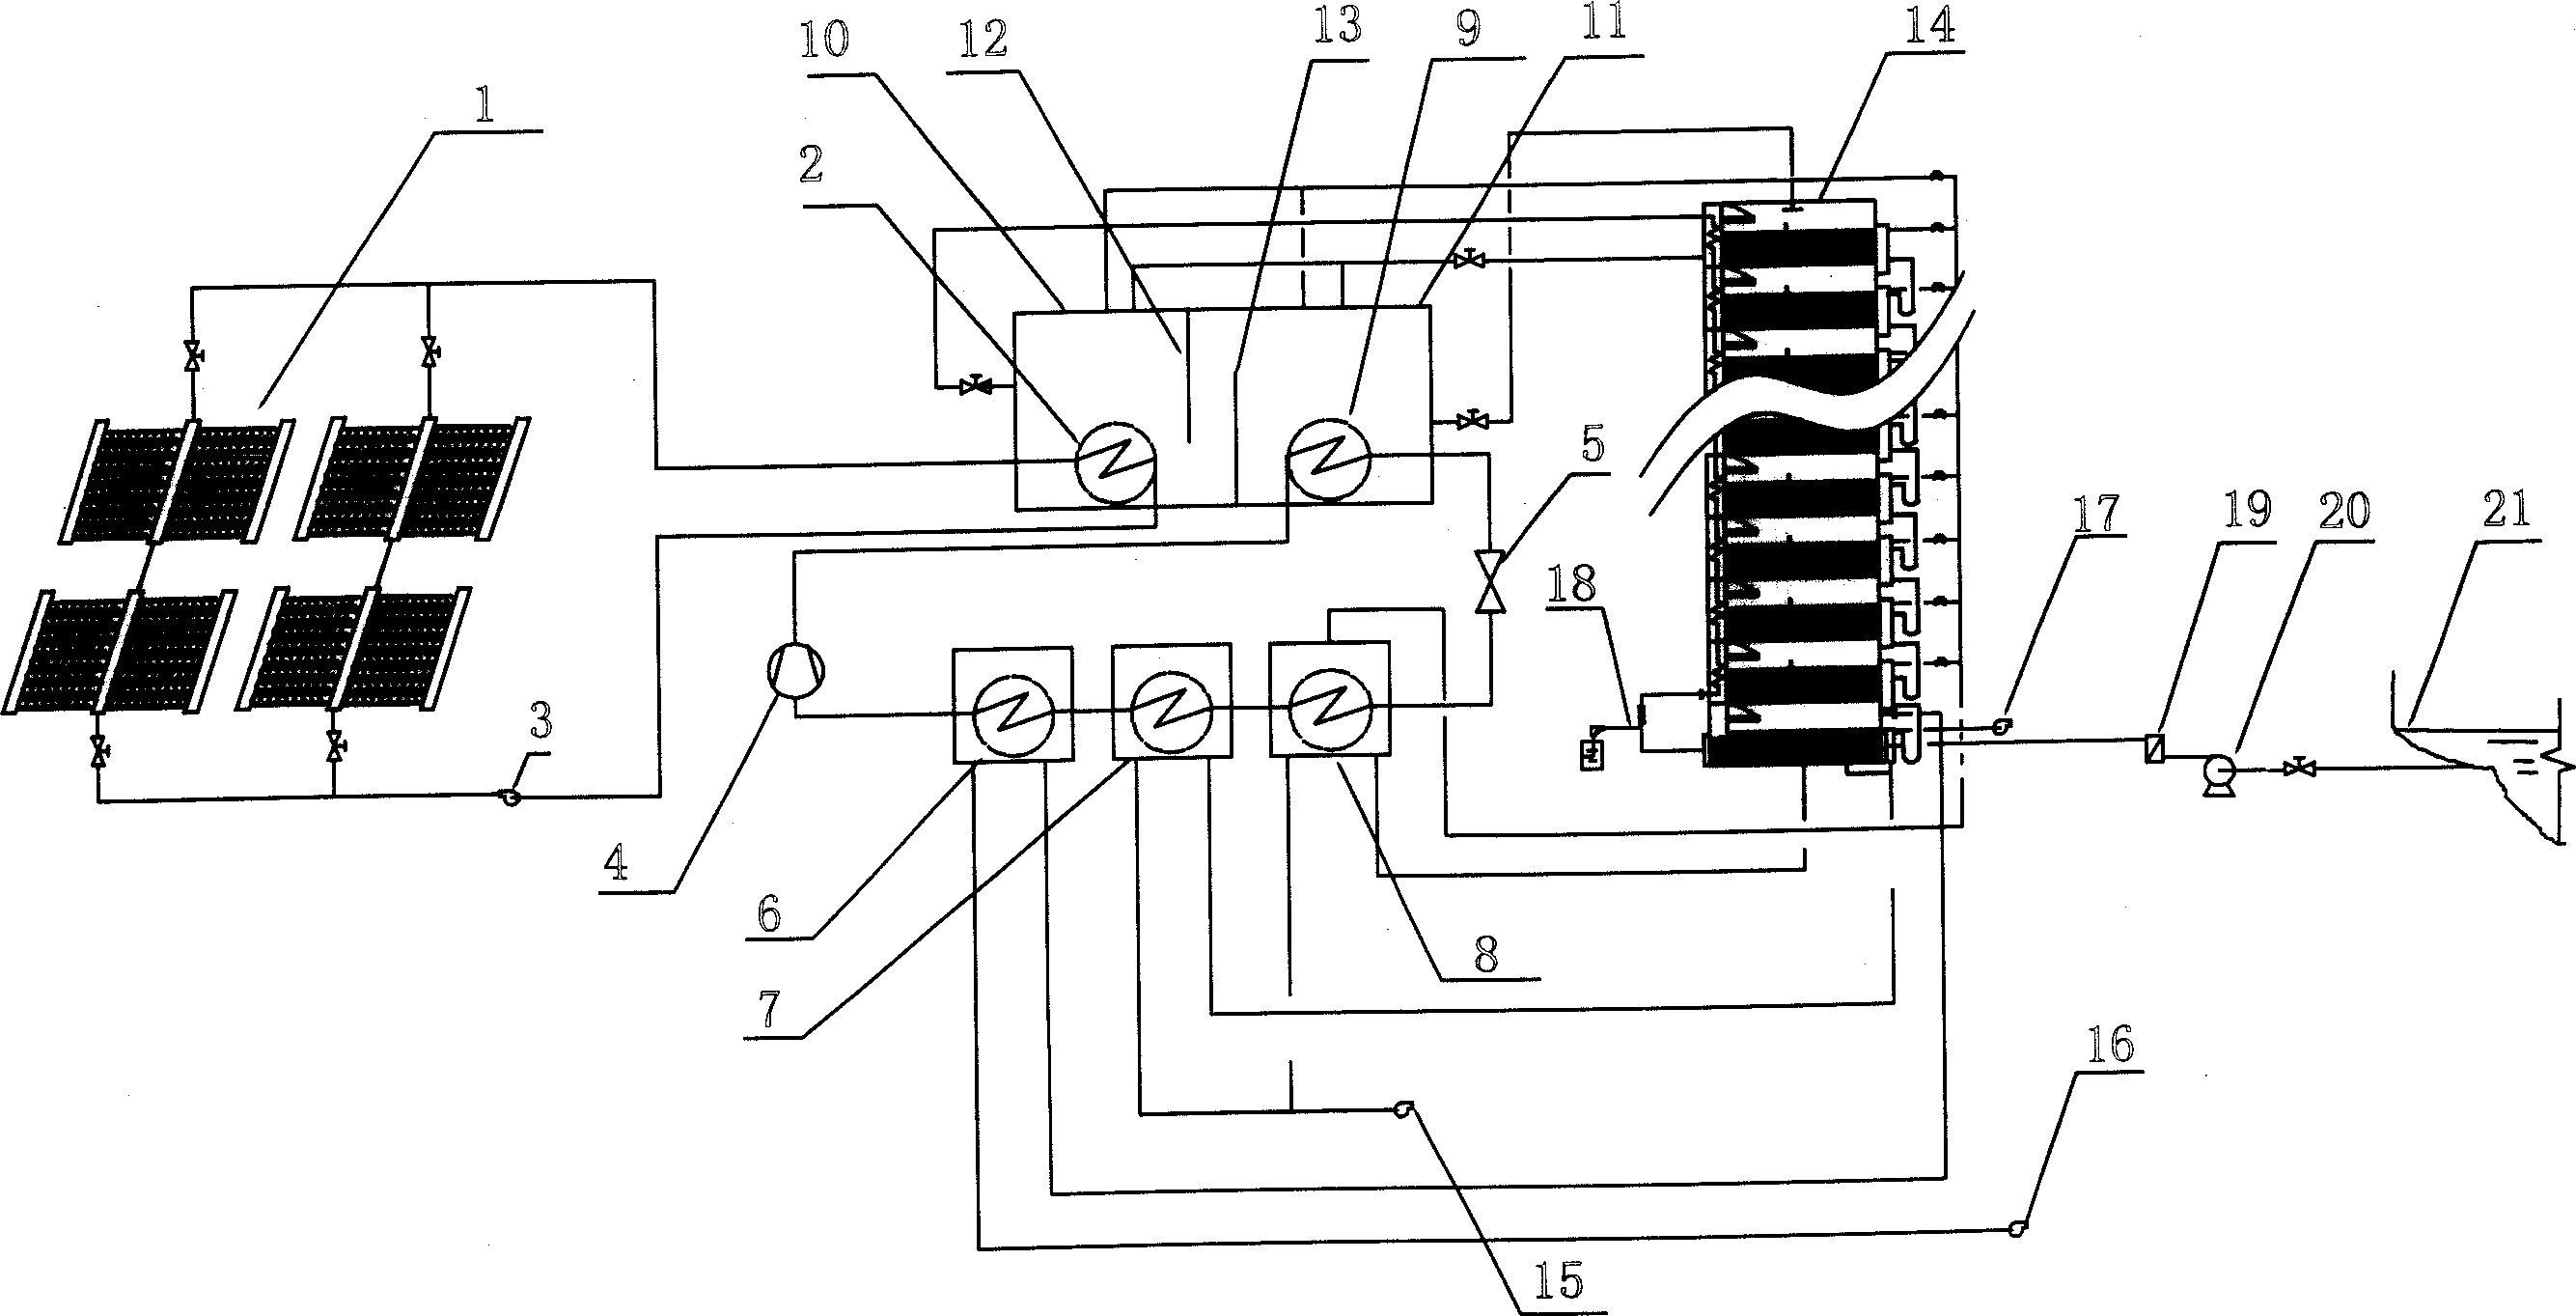 Apparatus of combined solar energy heat pump for desaltination of sea water